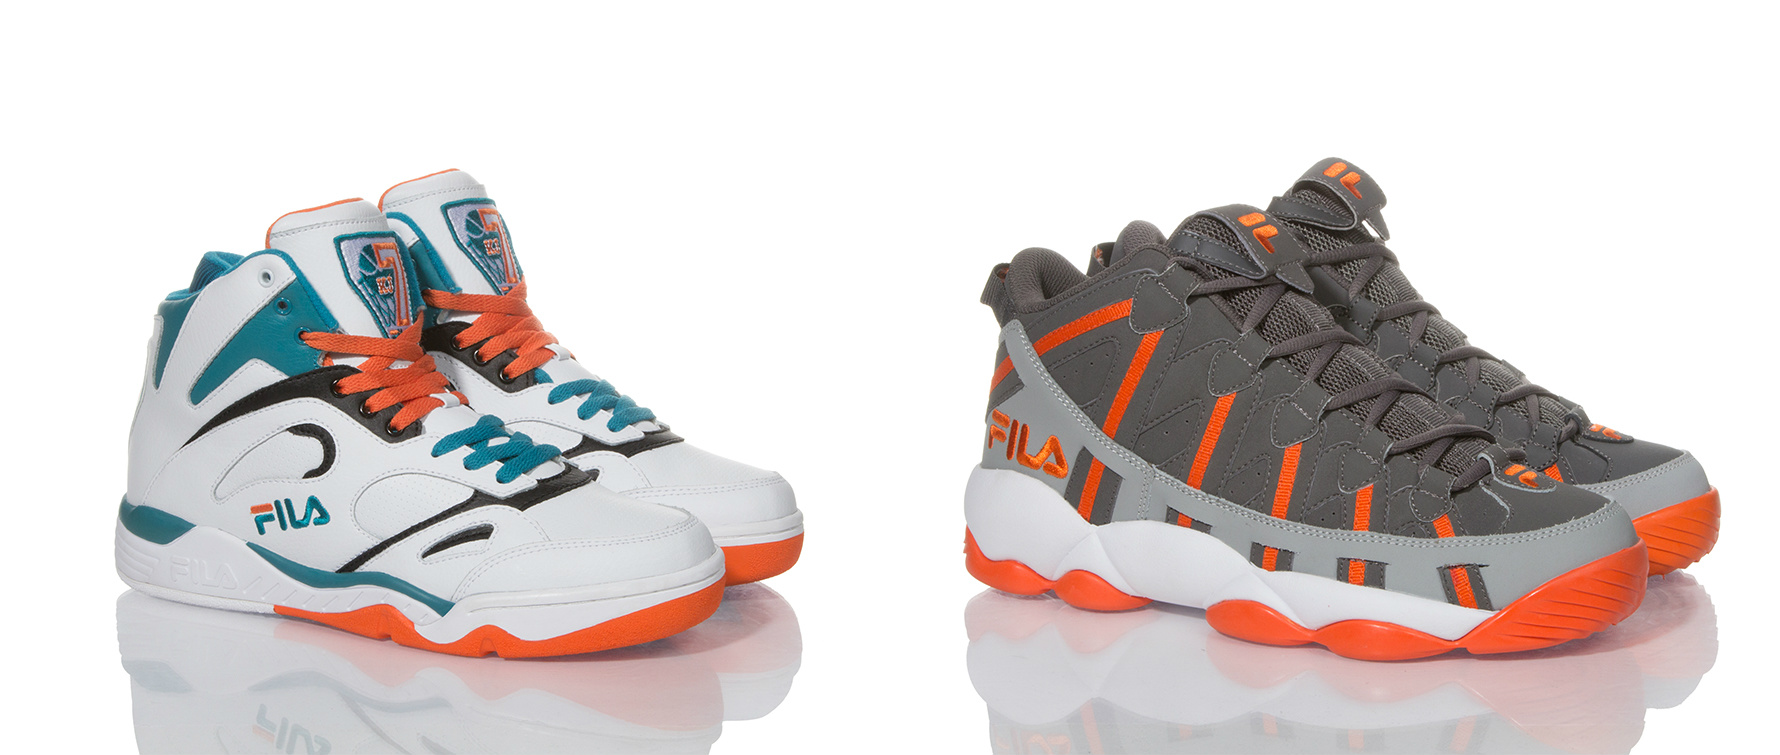 Sneakers Of The Day FILA Presents The MiamiInspired "Orange Pack